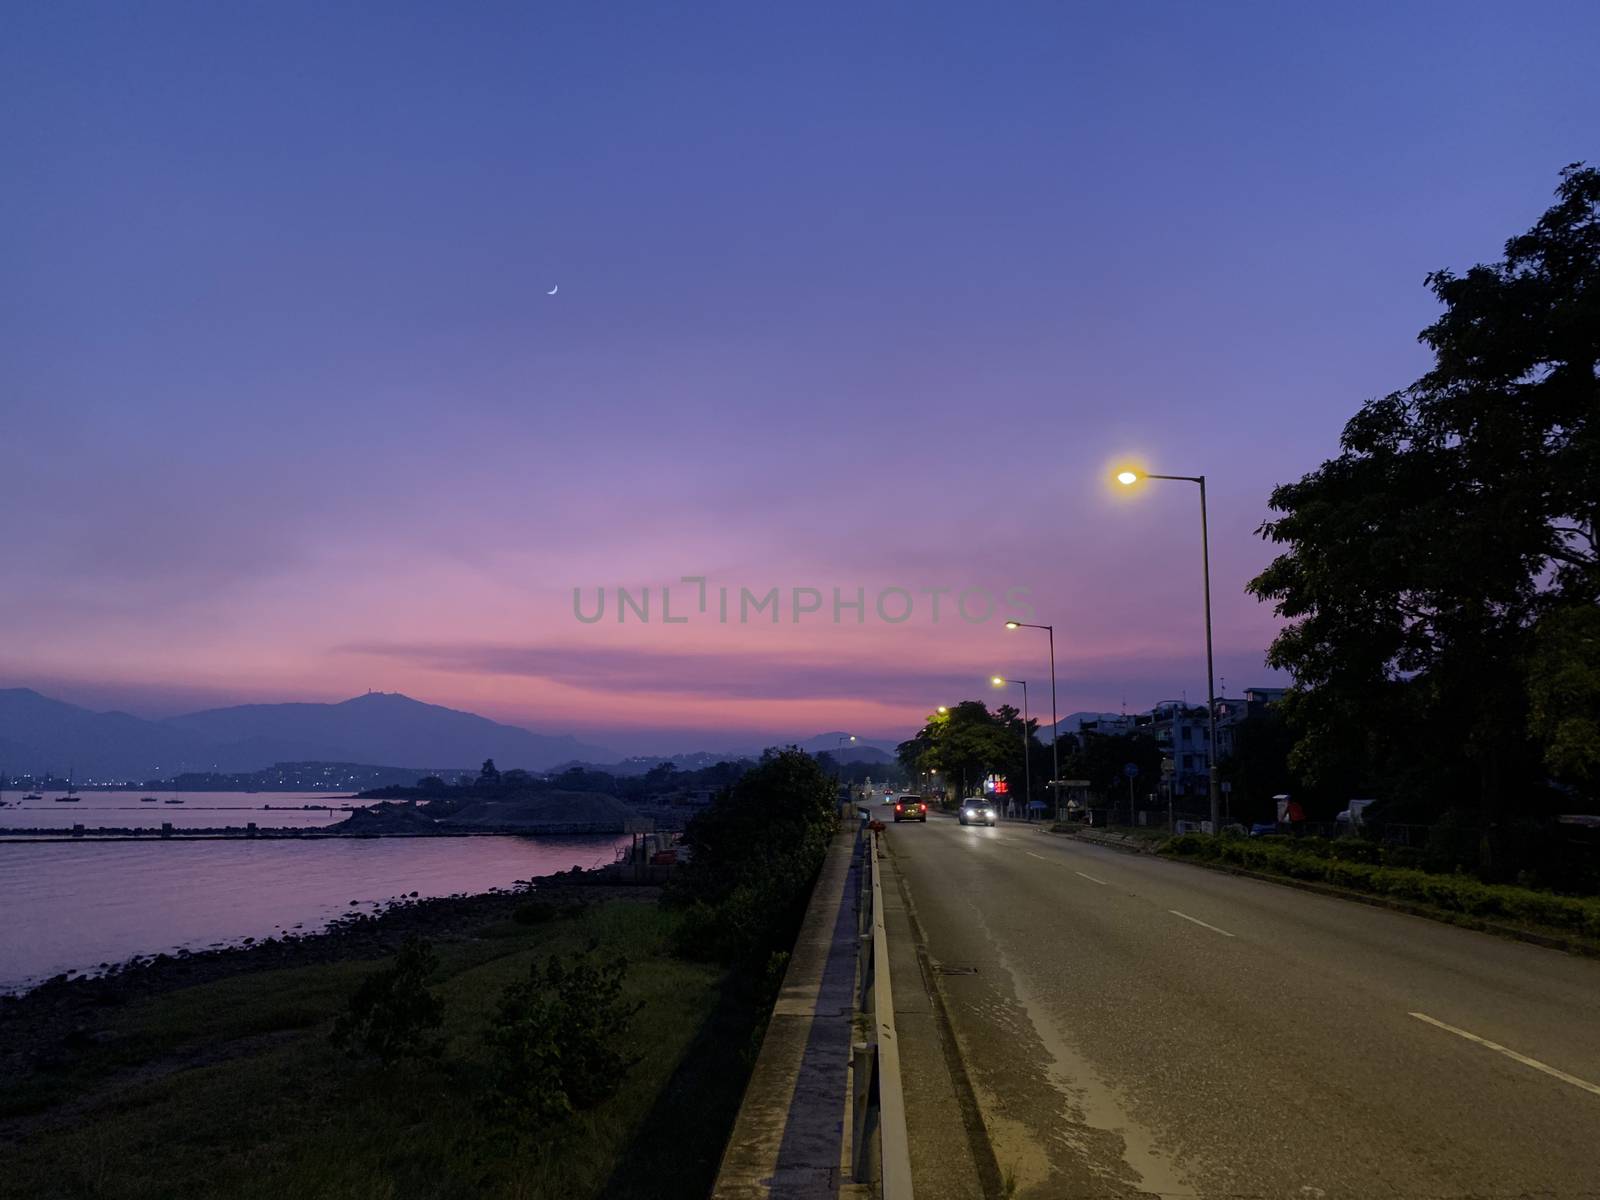 The pink and purple gradient sky, car road, bay and mountain at sunset